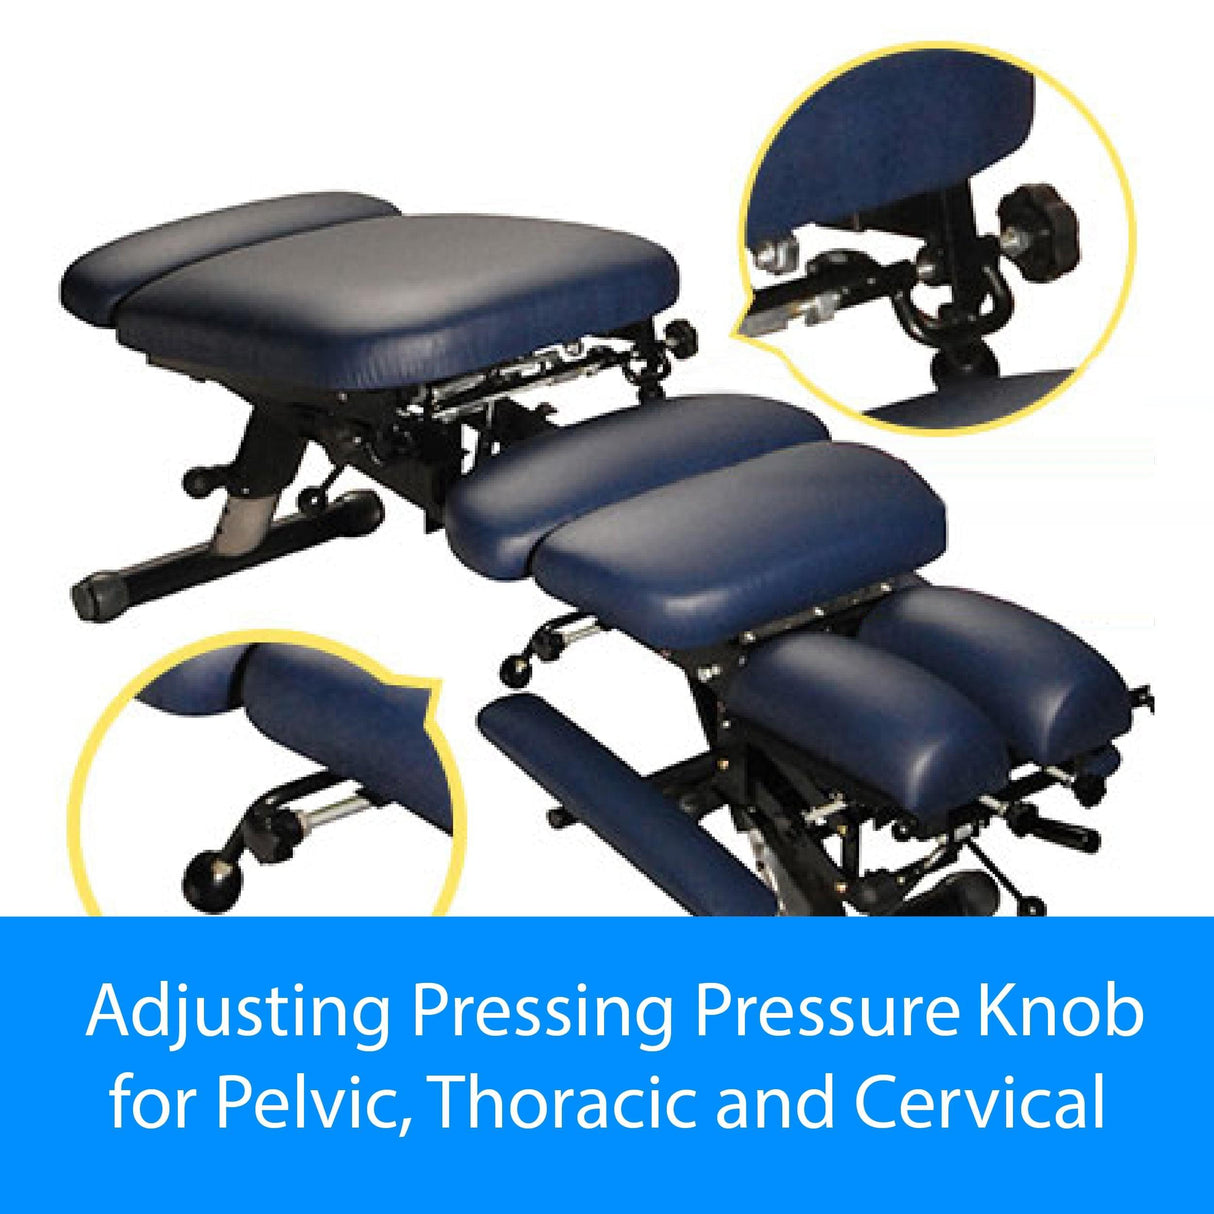 280 Series Stationary Chiropractic Table